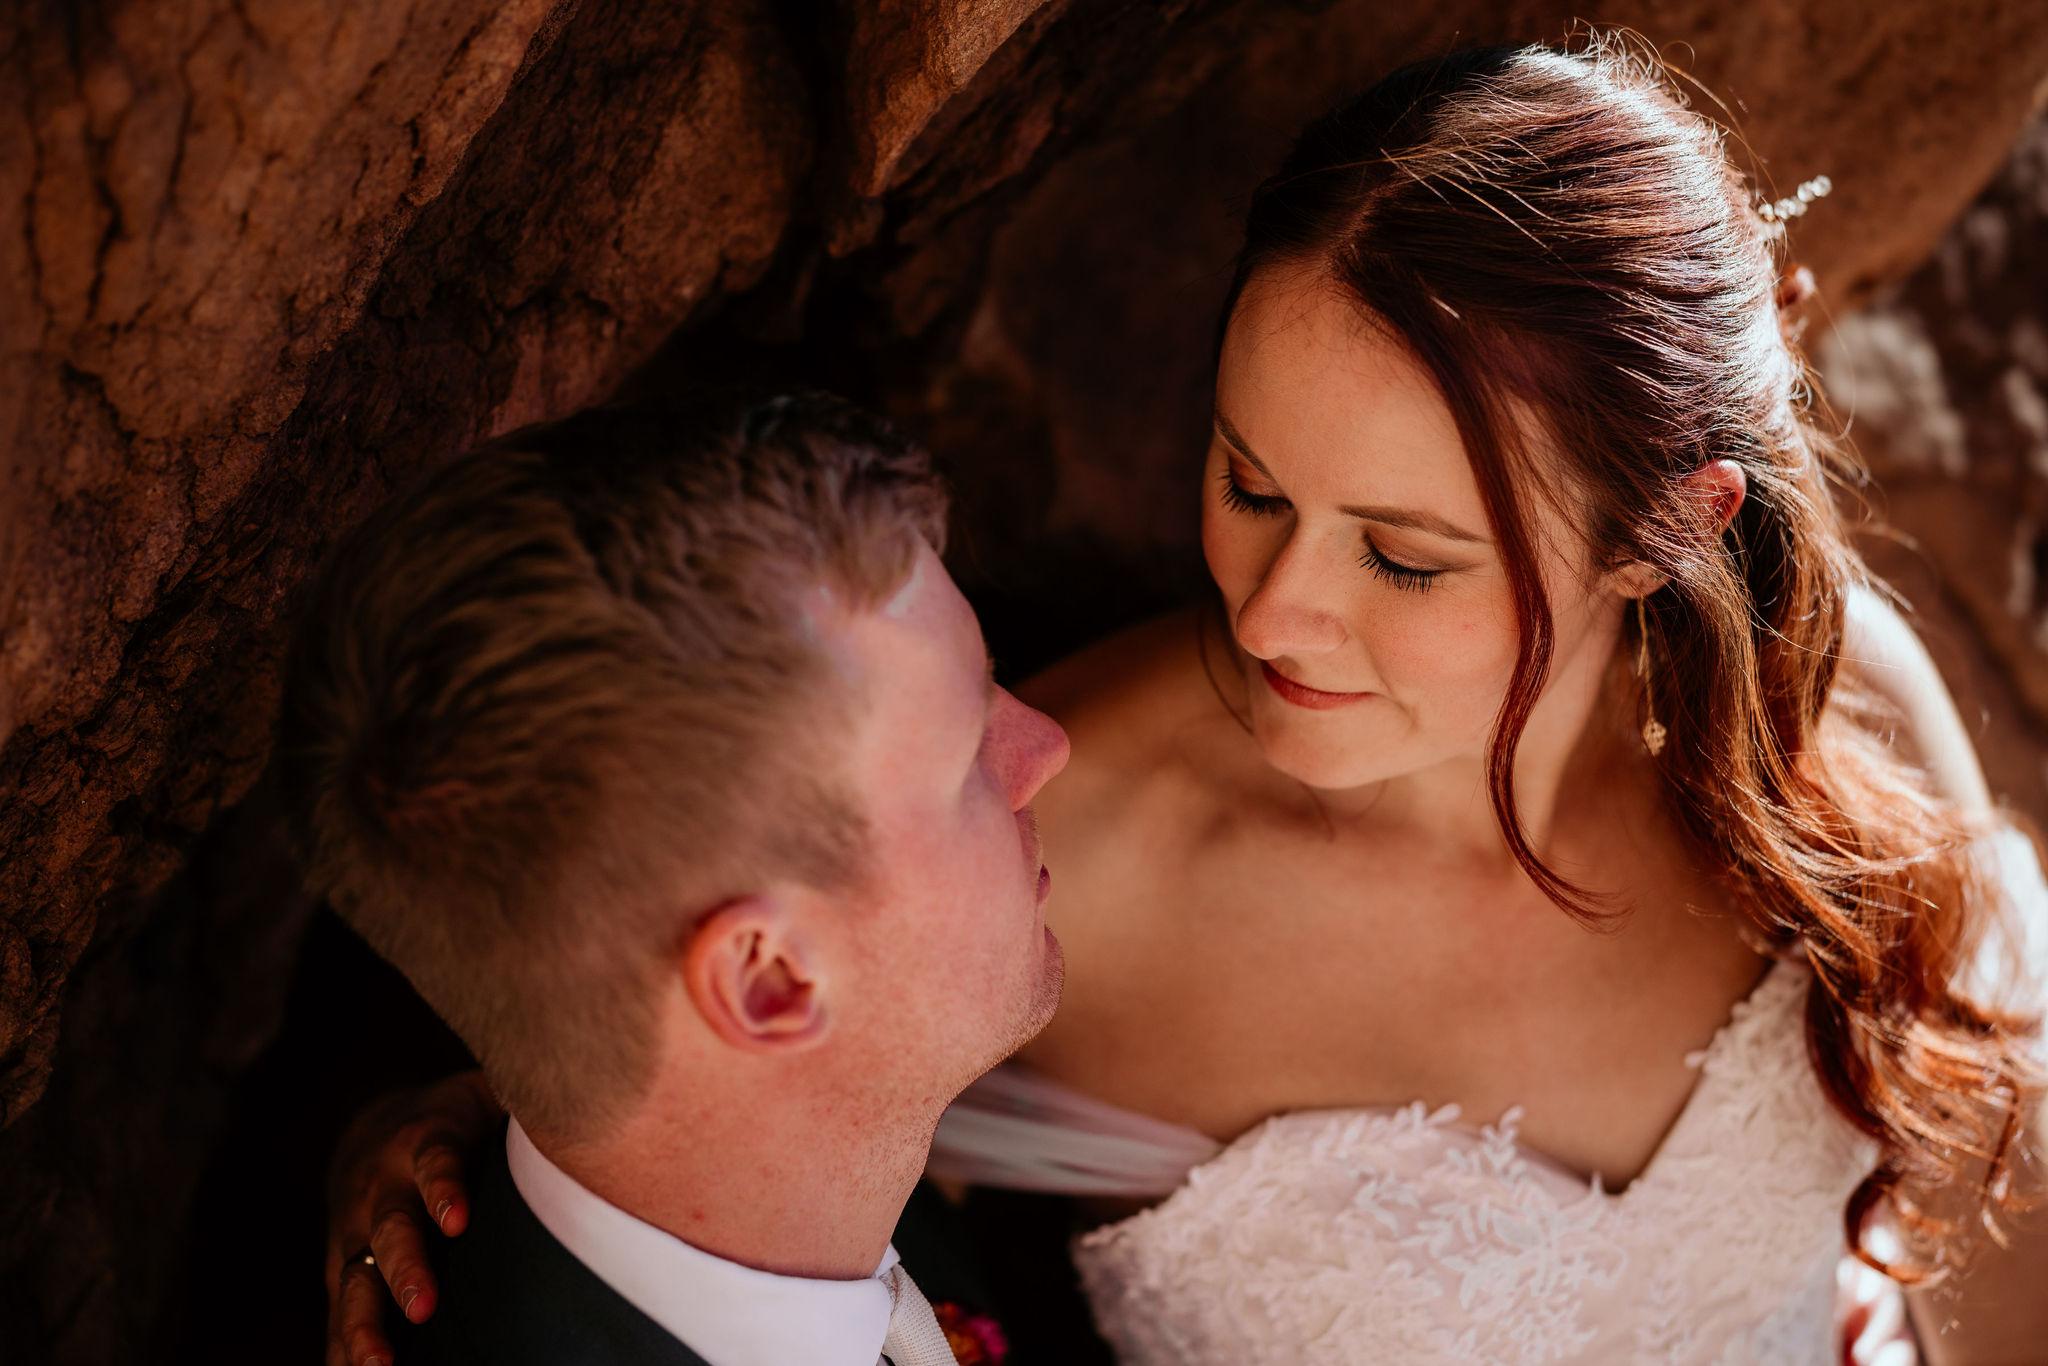 close up image of bride and groom smiling at each other during wedding portraits.